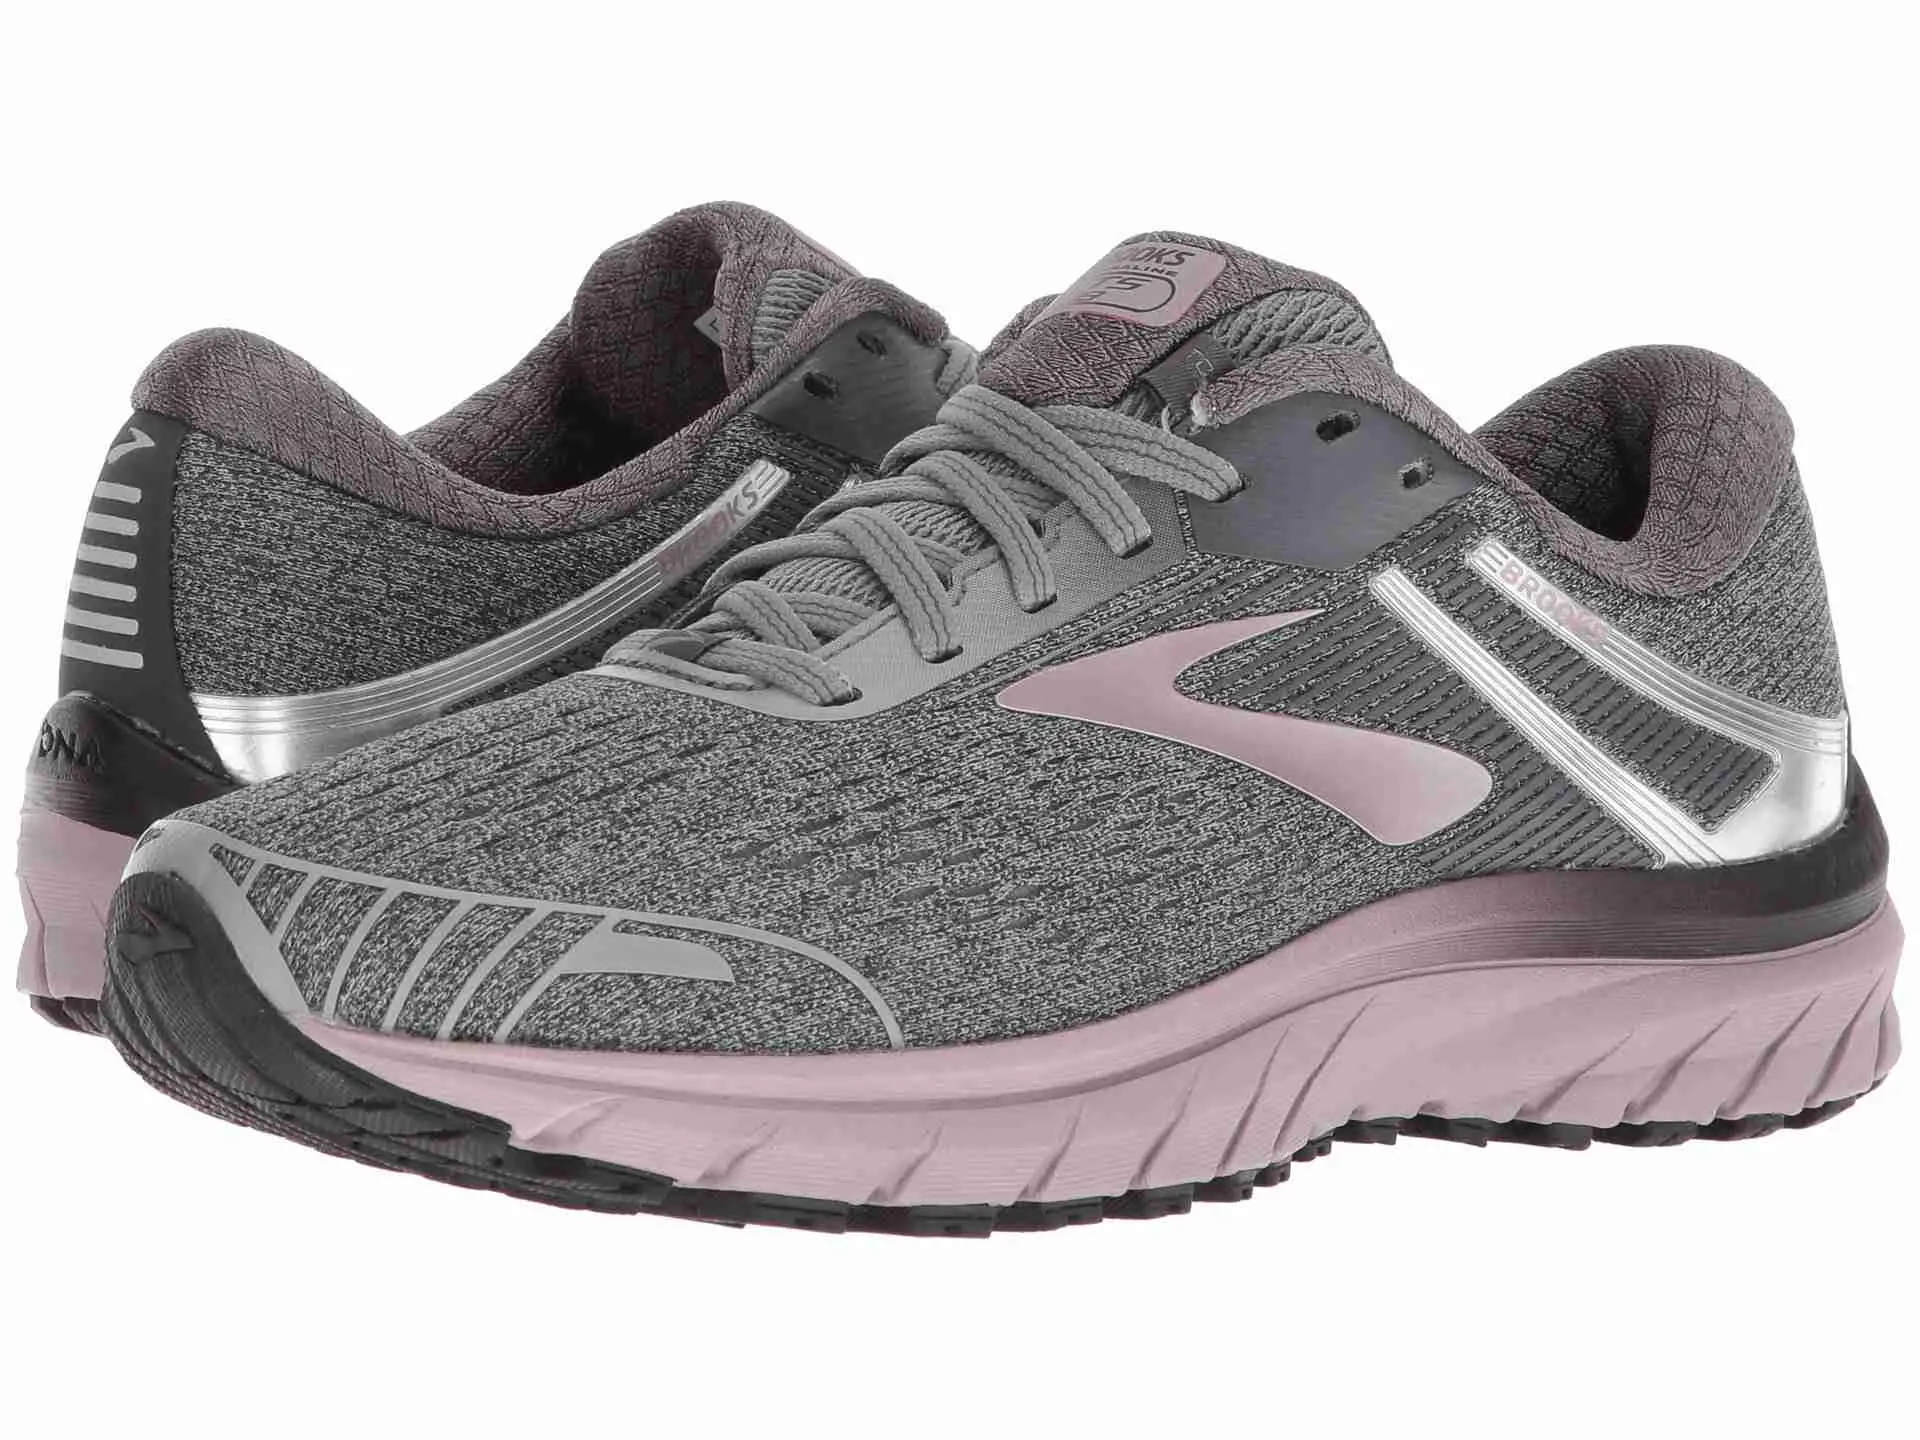 The 9 Best Walking Shoes for Flat Feet of 2019